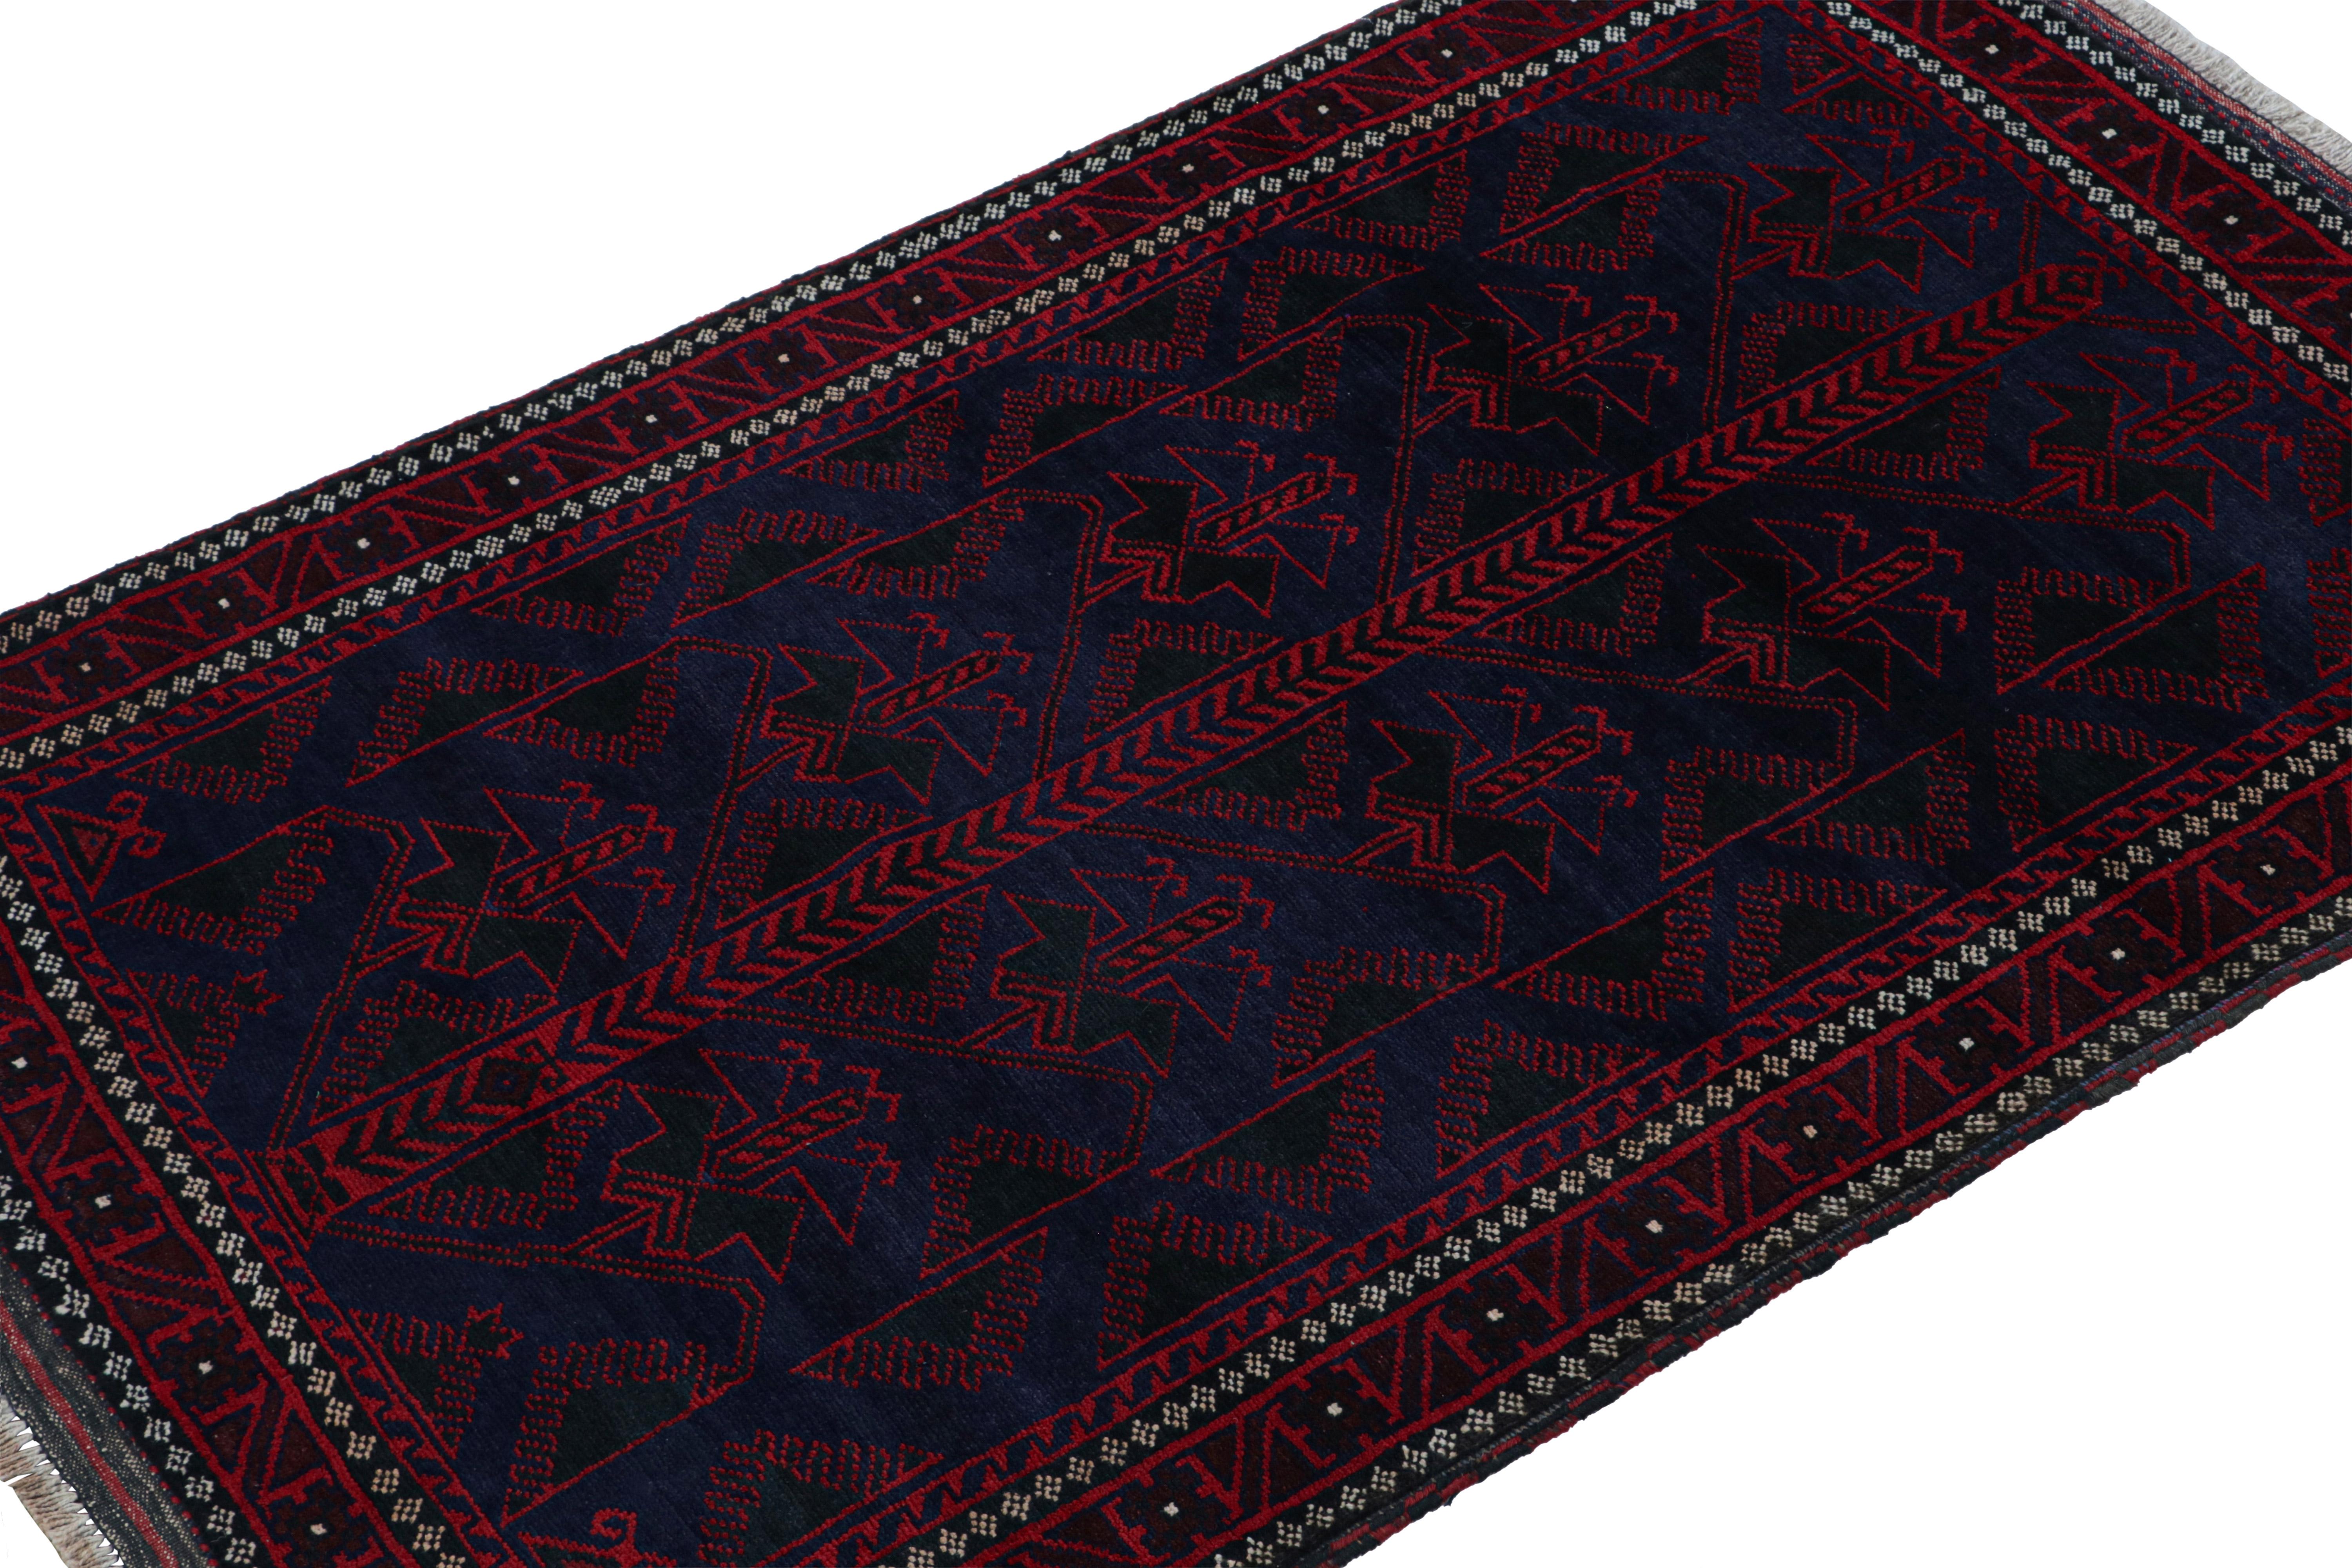 Hand-knotted in wool & goat hair circa 1950-1960, this 4x6 vintage Baluch tribal rug is a new curation from Rug & Kilim. 

On the Design: 

This runner rug boasts geometric patterns in saturated red and navy blue tones. Keen eyes will admire fine